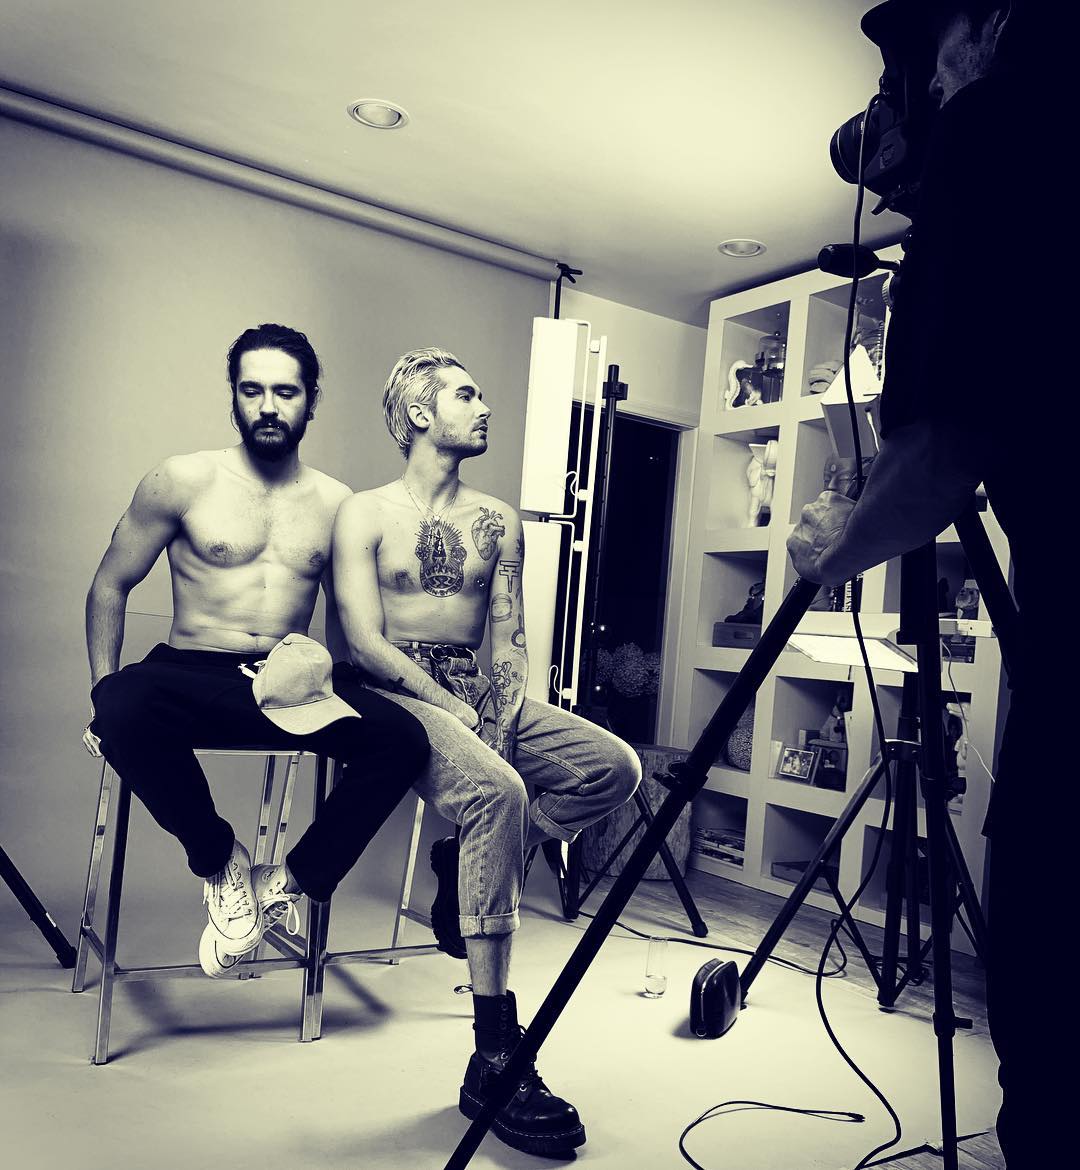 13.01.19 - Tom and Bill at the photoshoot for Malancholic Paradise